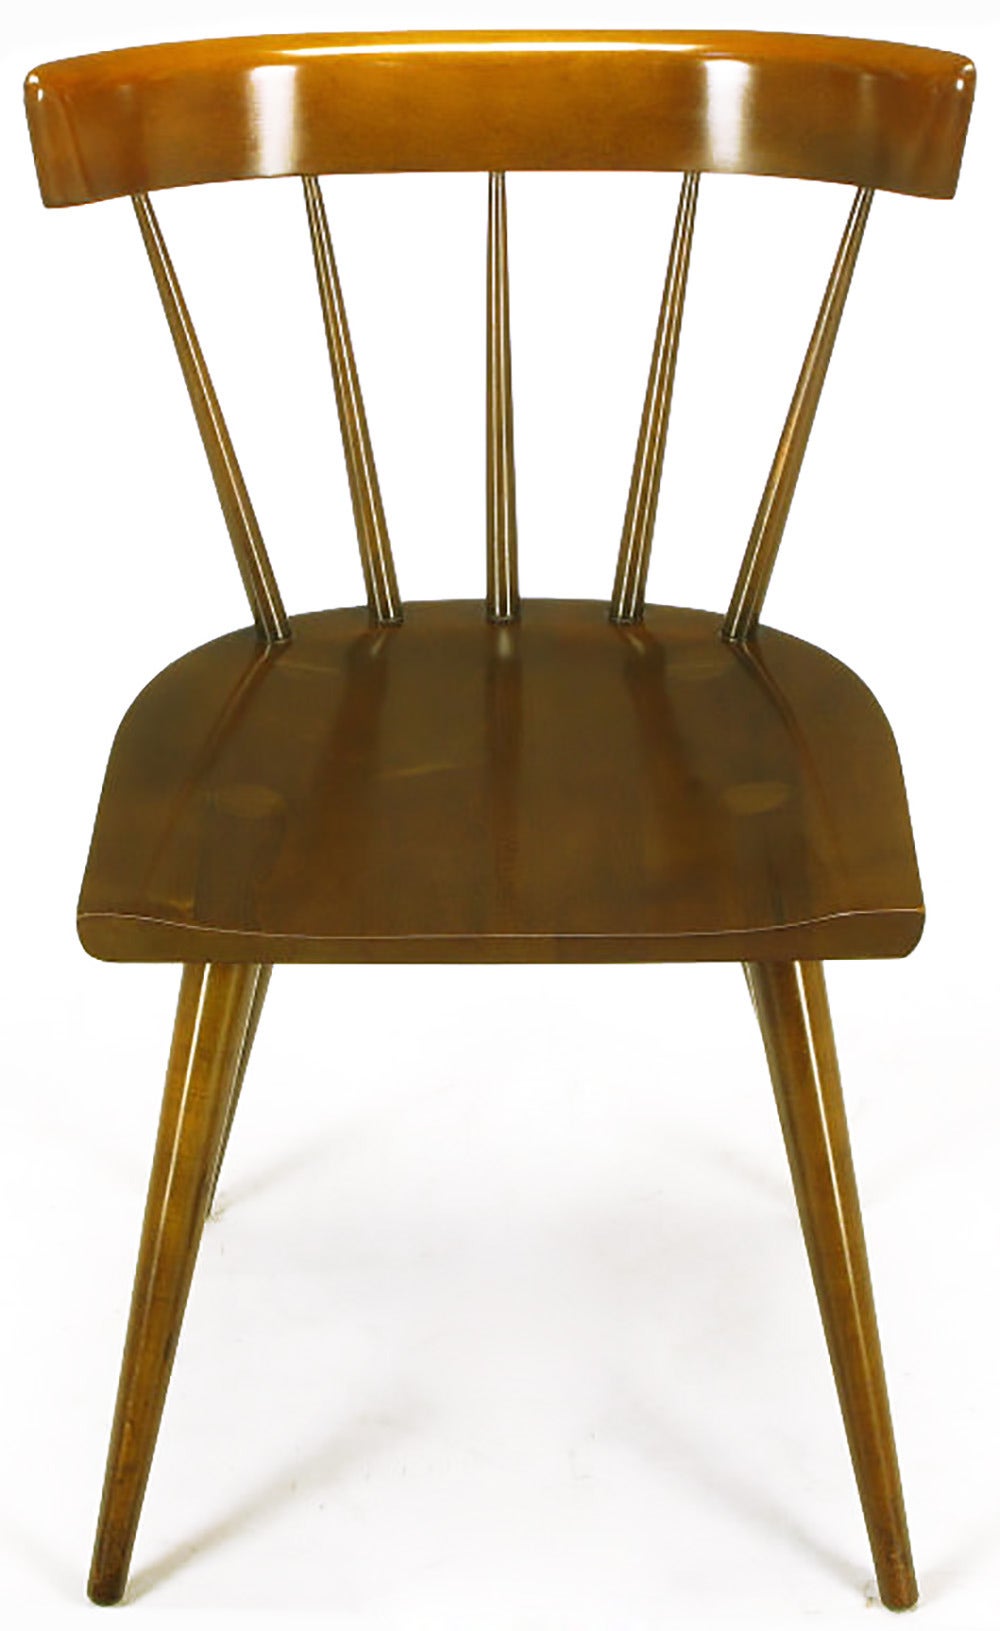 Set of four Planner Group dark maple spindle back dining chairs by Paul McCobb for Winchendon. An iconic McCobb design.